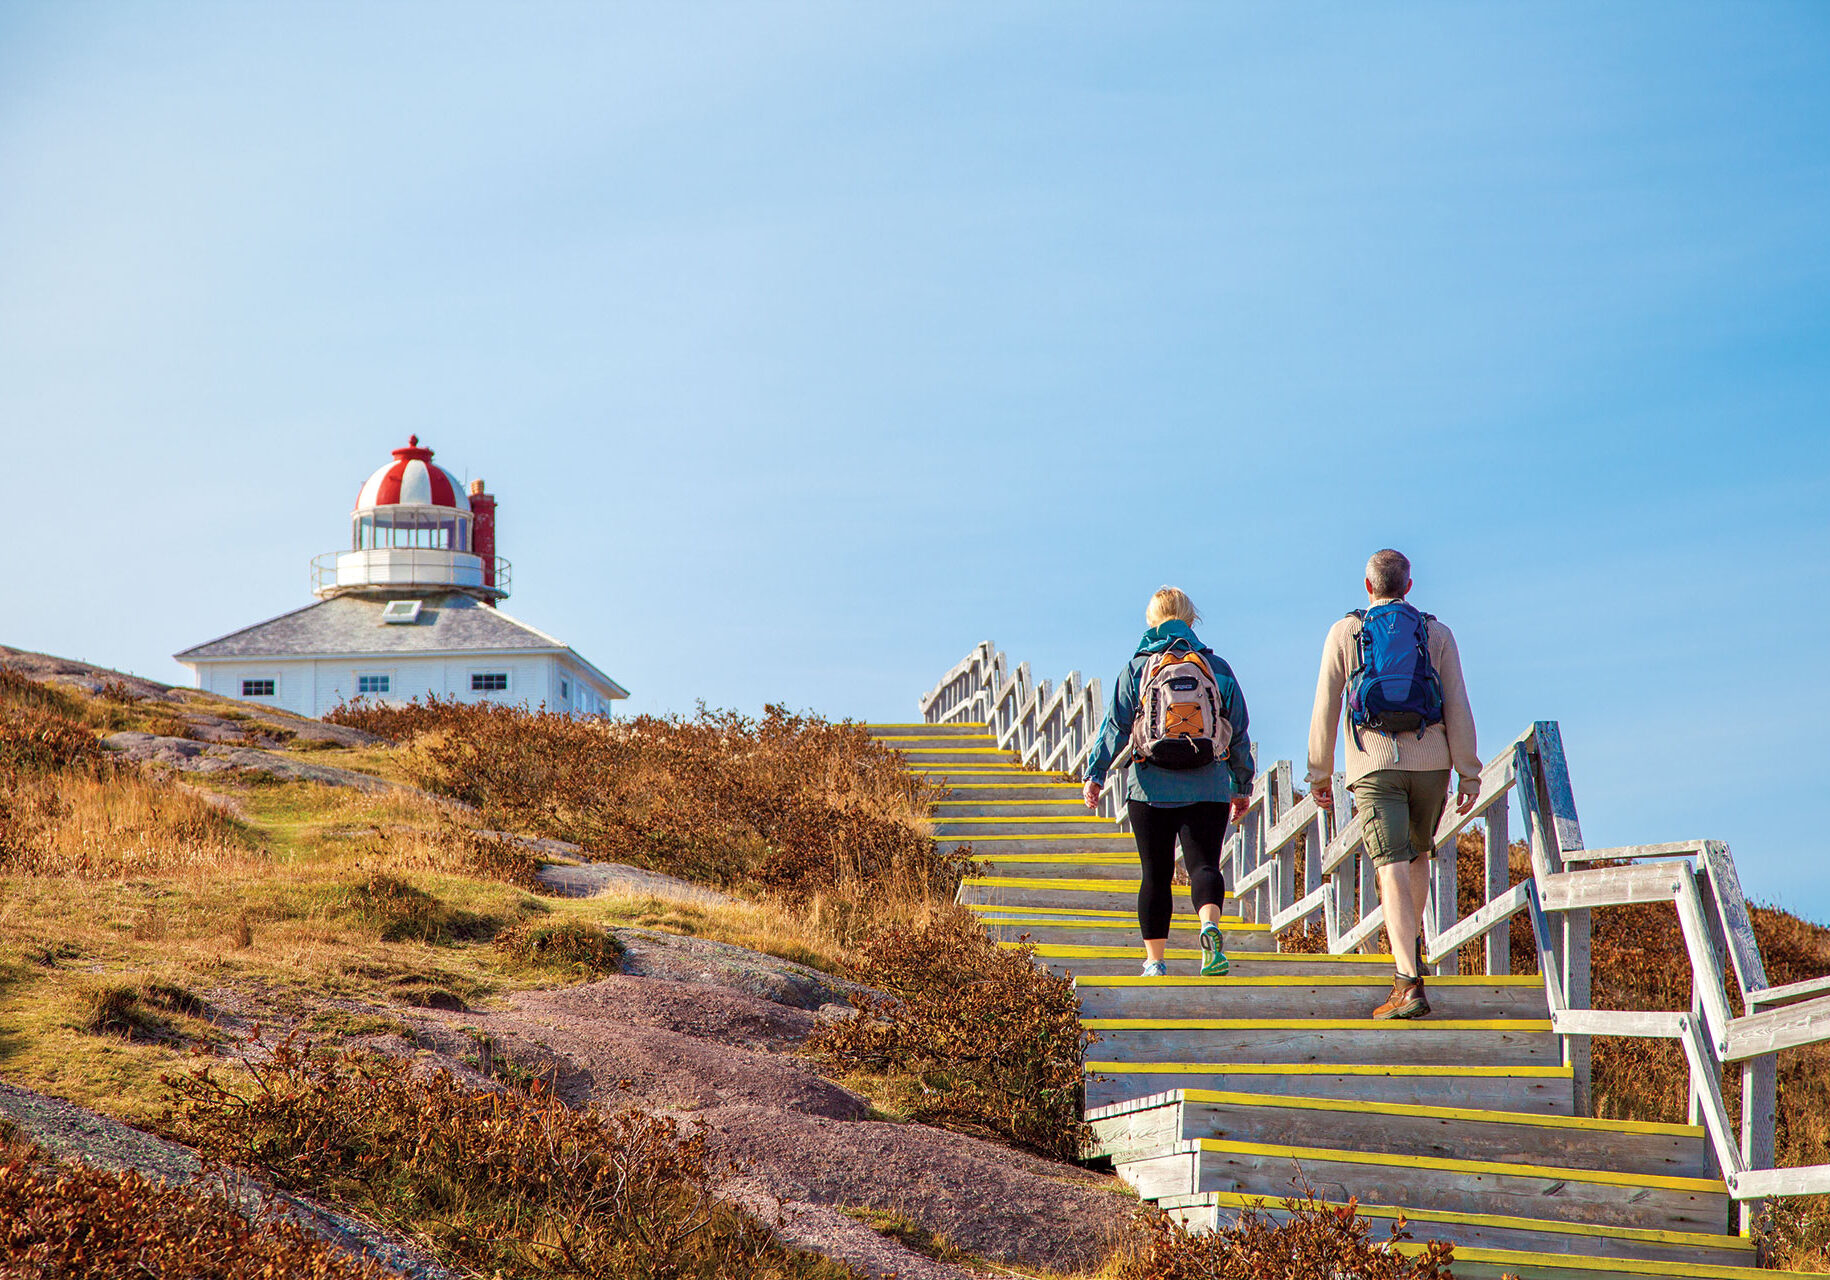 Historic St. John's and Cape Spear